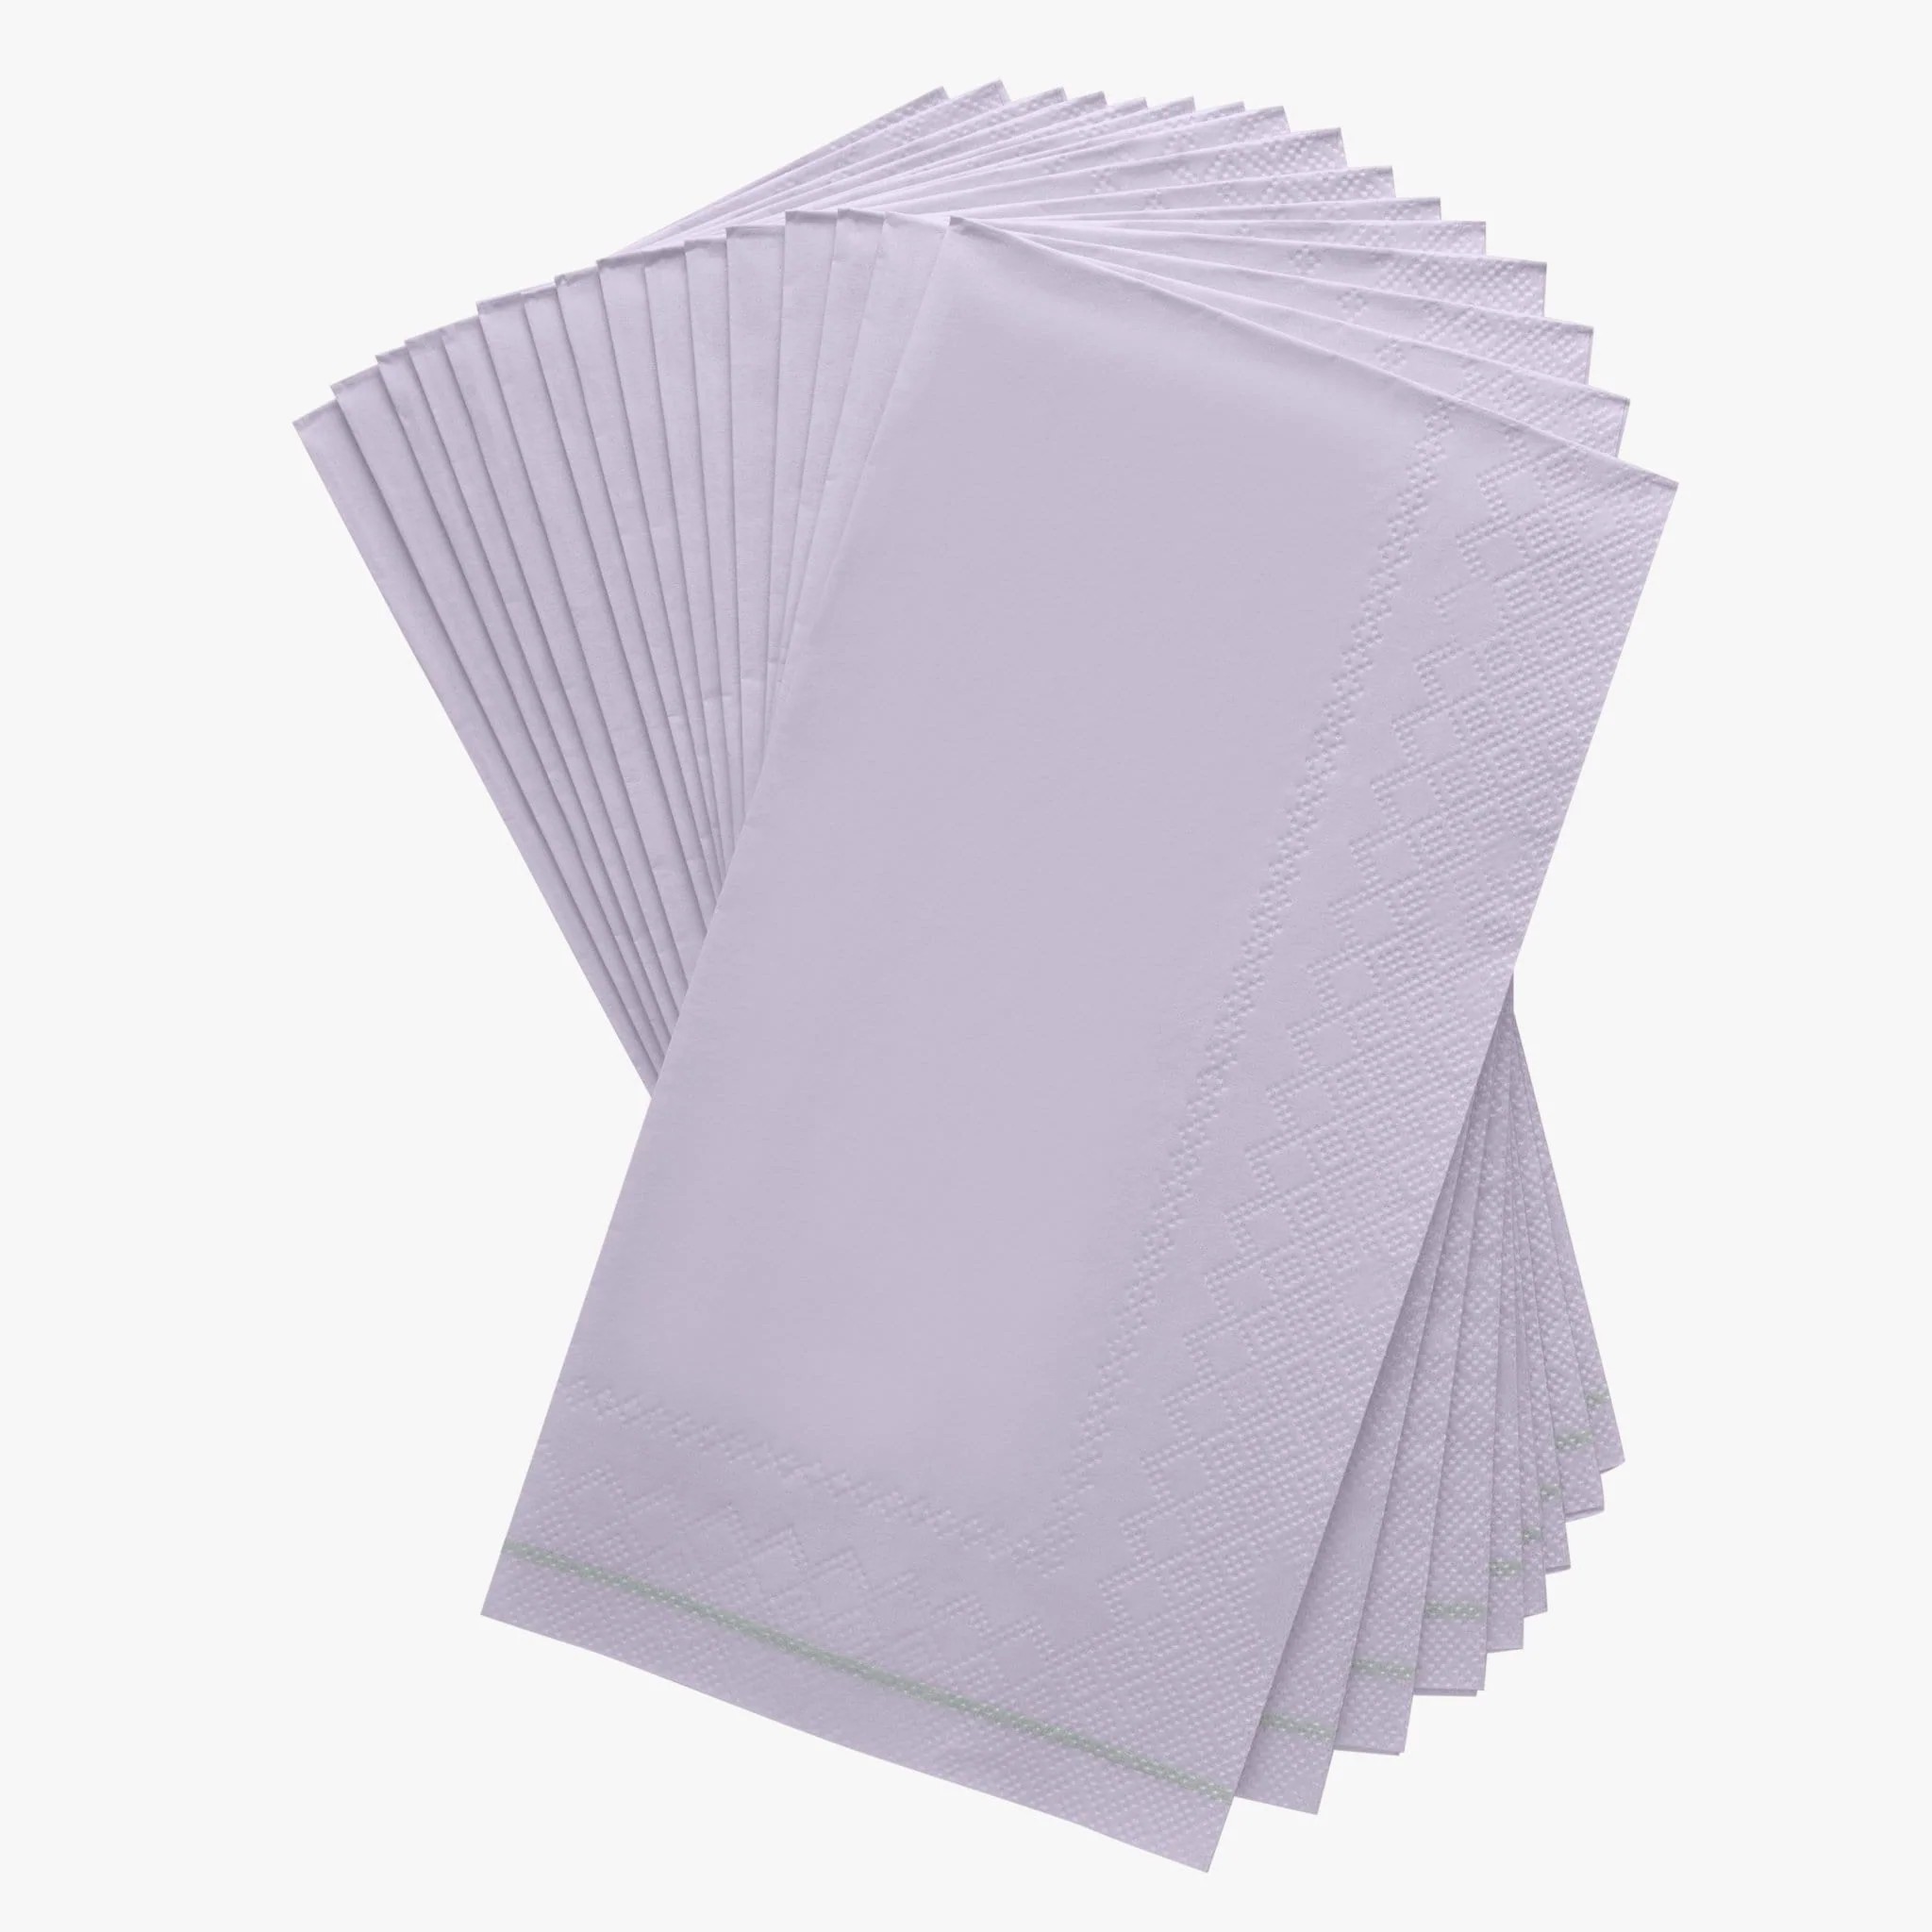 Luxe Party Lavender with Silver Stripe Dinner Napkins - 16 pcs